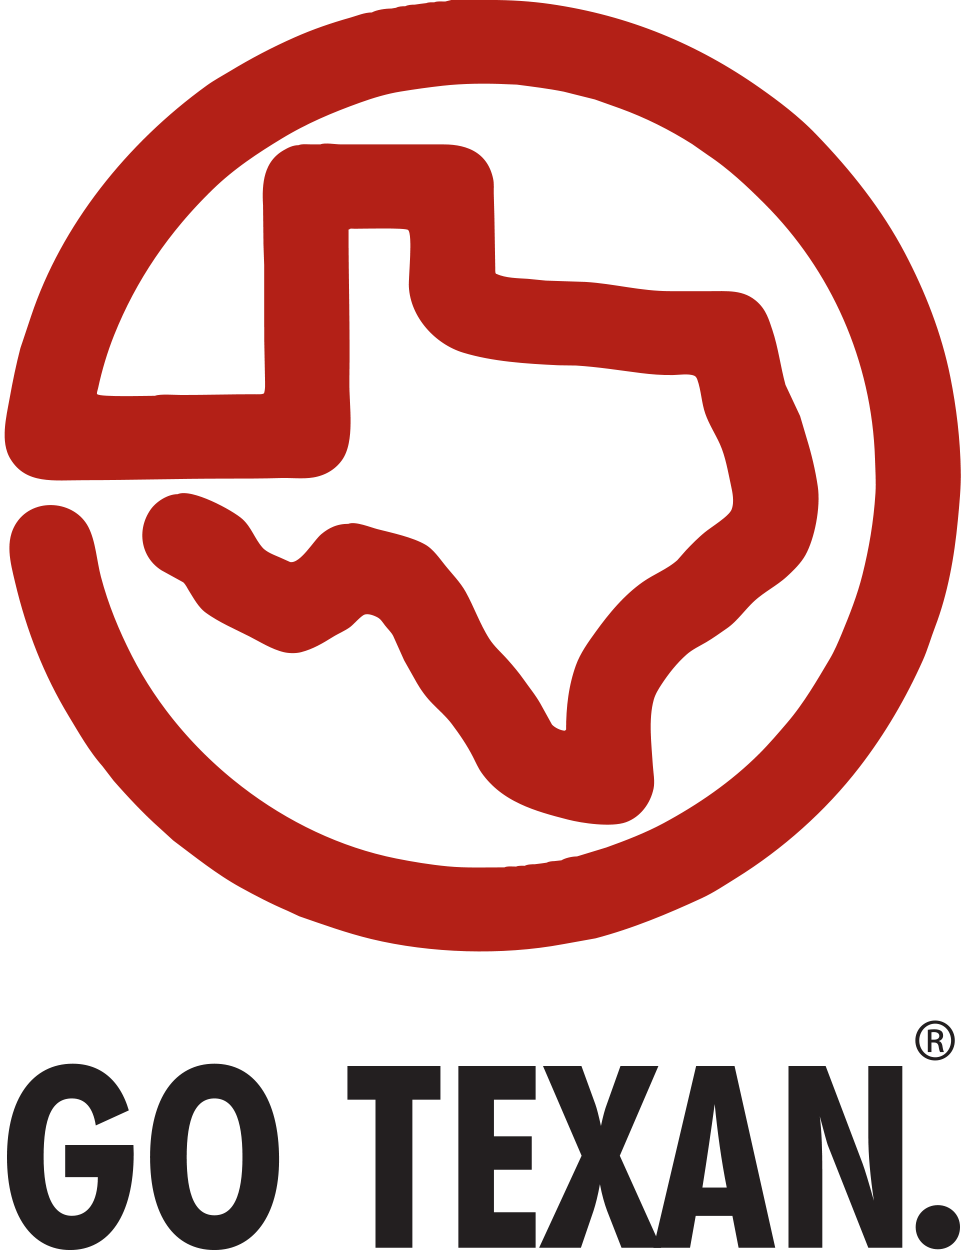 Texas Pecan Cakes and the GO TEXAN Initiative: A Partnership Made in the Heart of Texas